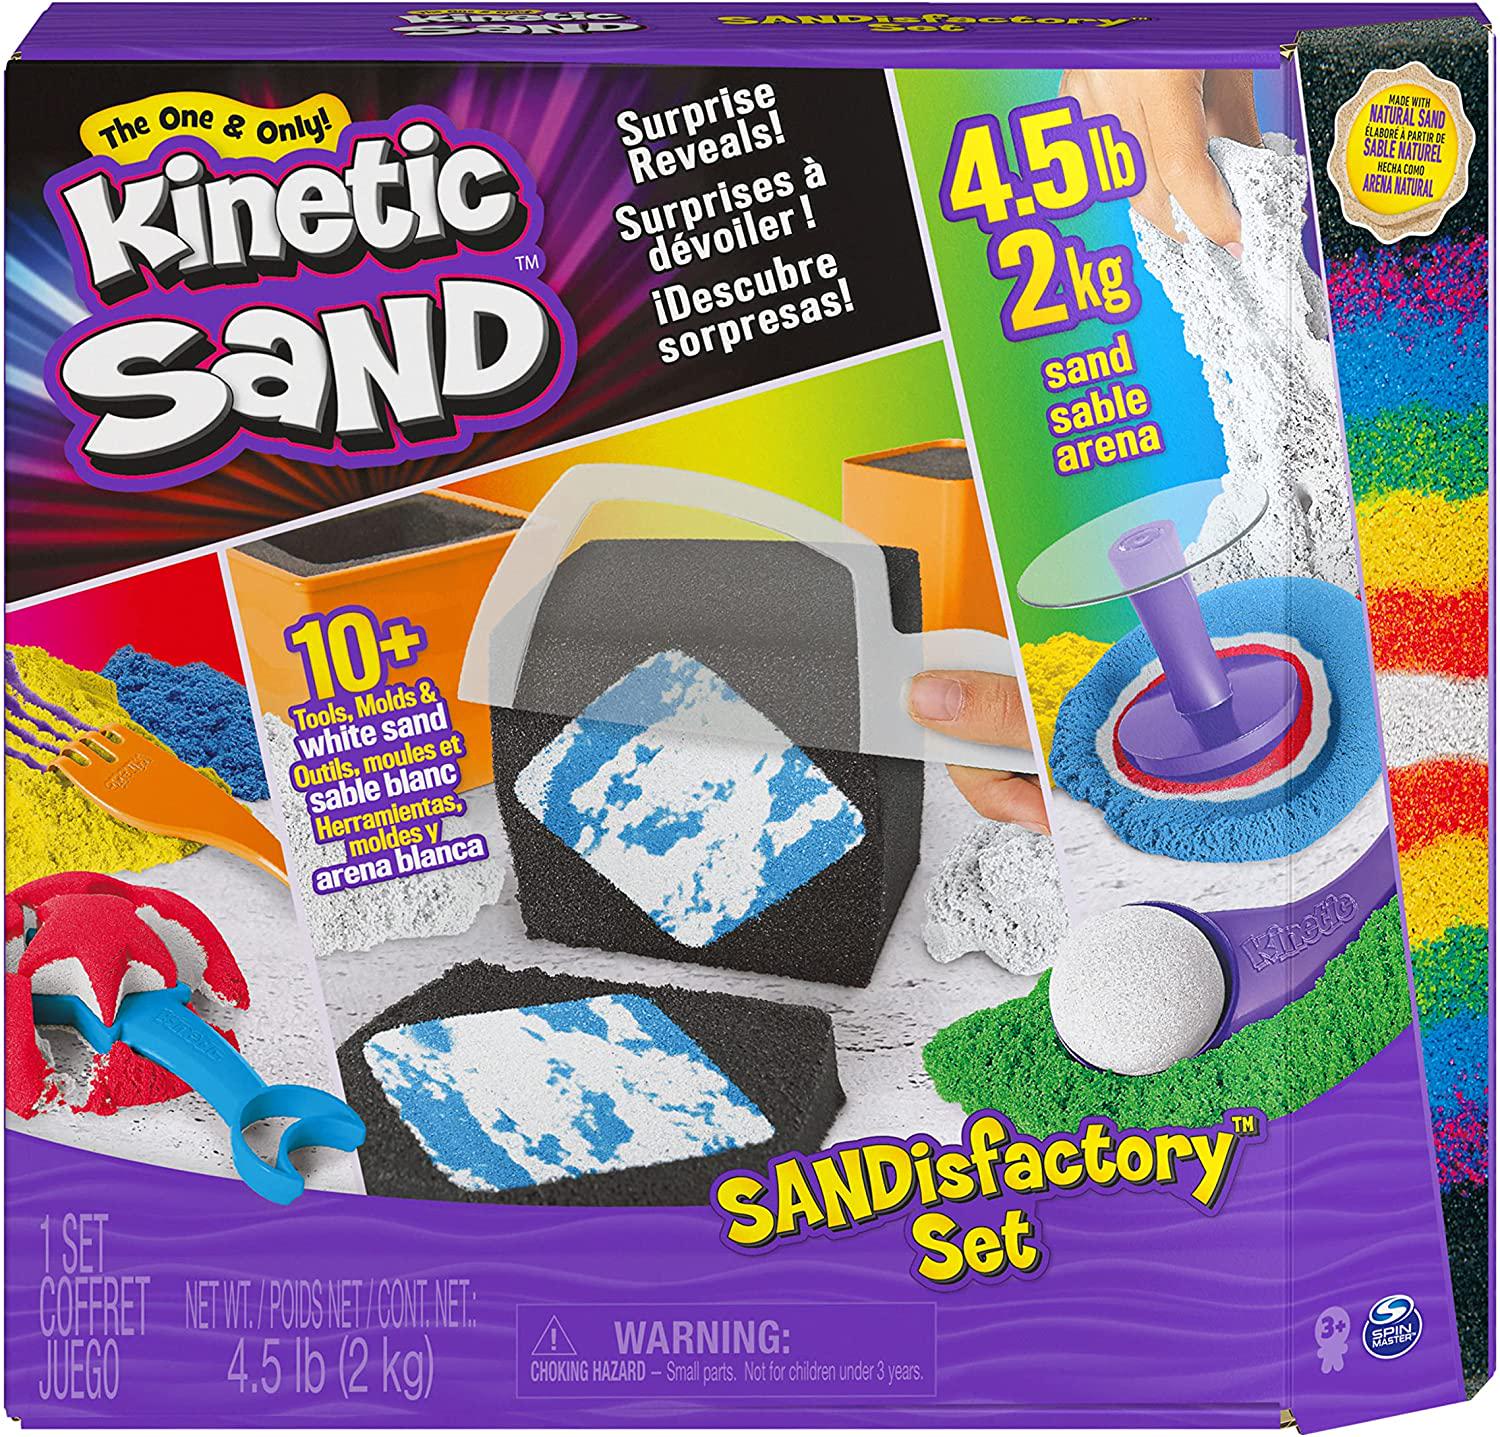 Kinetic Sand, Kinetic Sand, Sandisfactory Set, 4.5lbs of Colored and Rare White, 10 Tools and Molds, Play Sand for Kids Ages 3 and Up, Exclusive